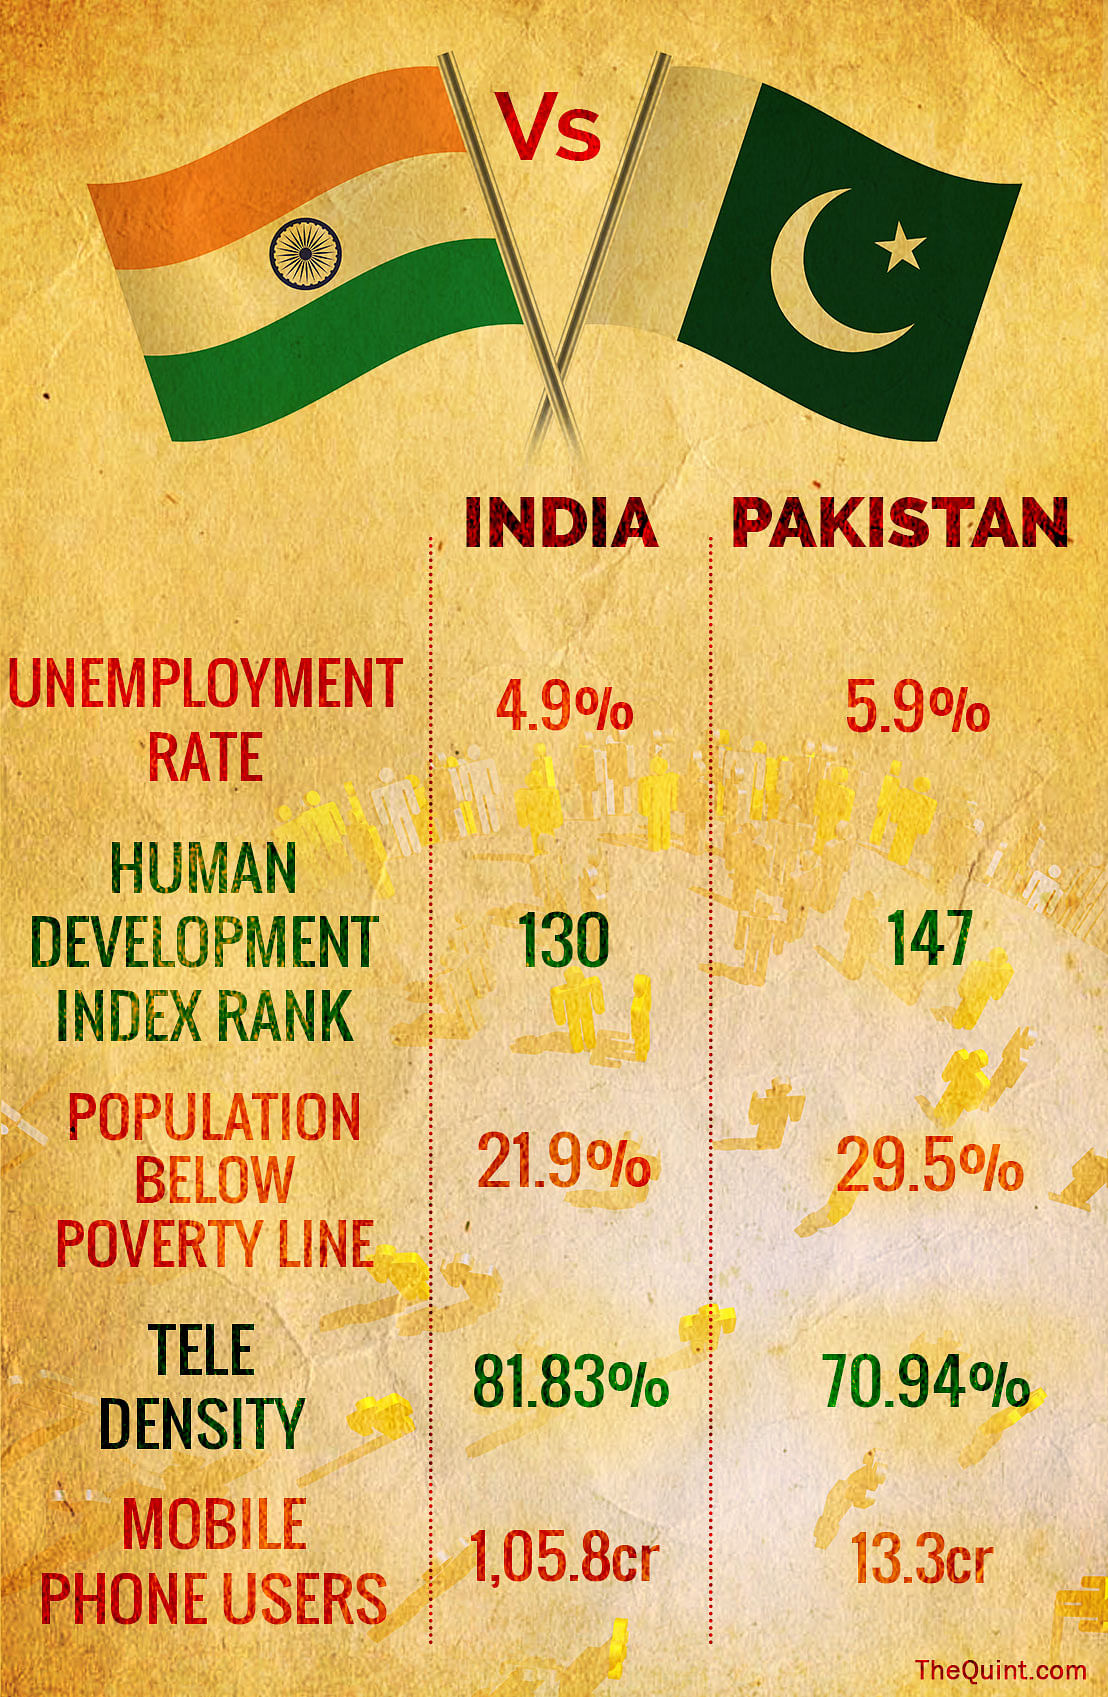 Here’s a comparative chart of how India and Pakistan have fared socio-economically, in the years after 1947.